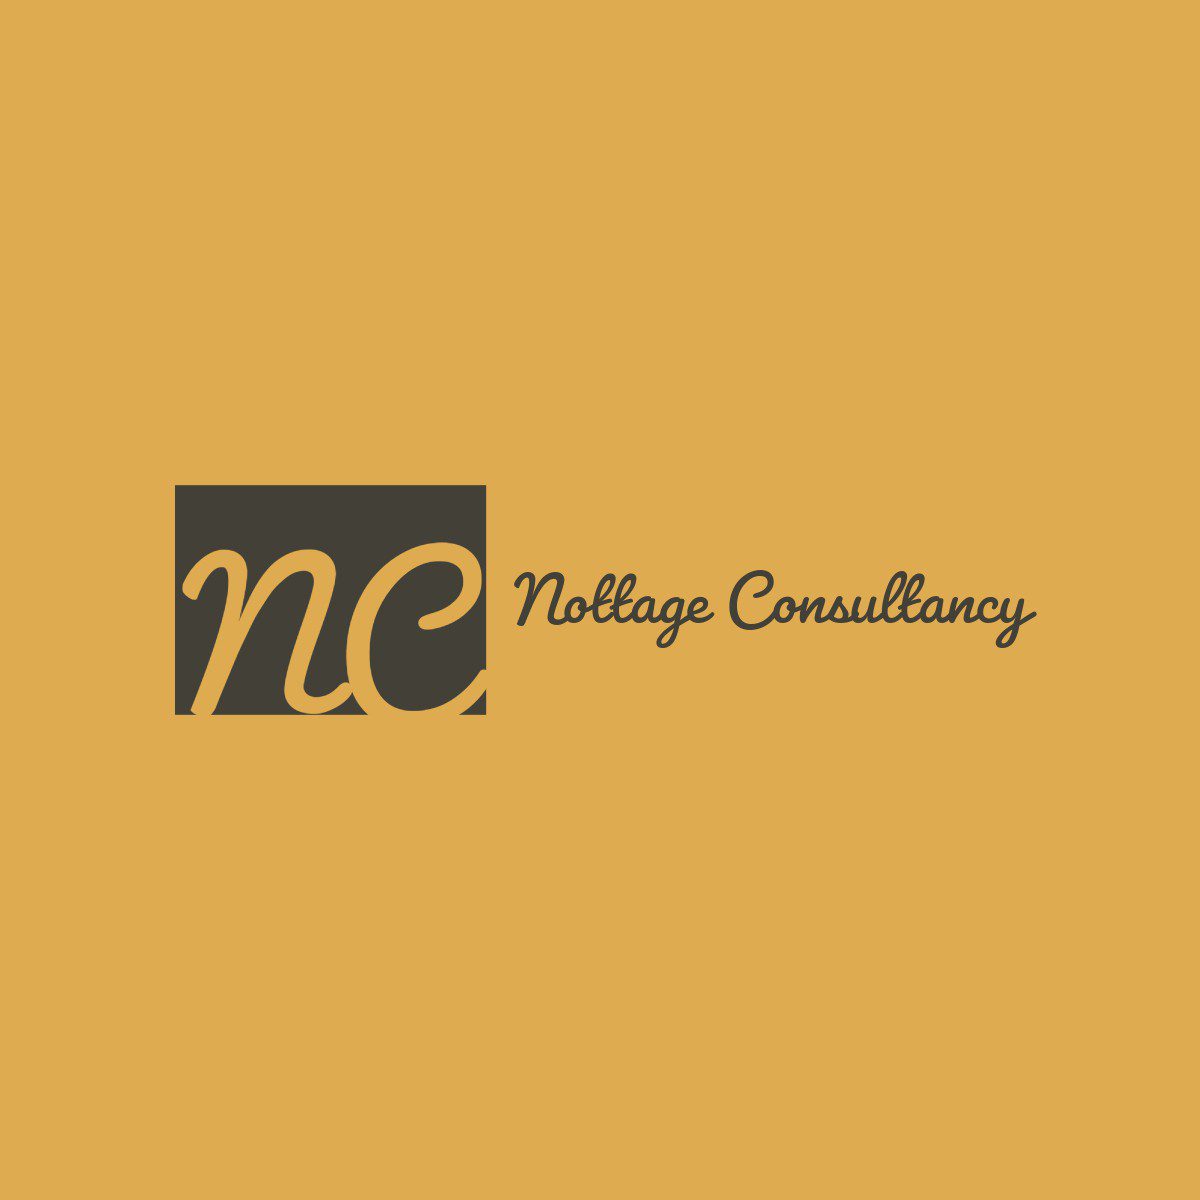 Nottage Consultancy